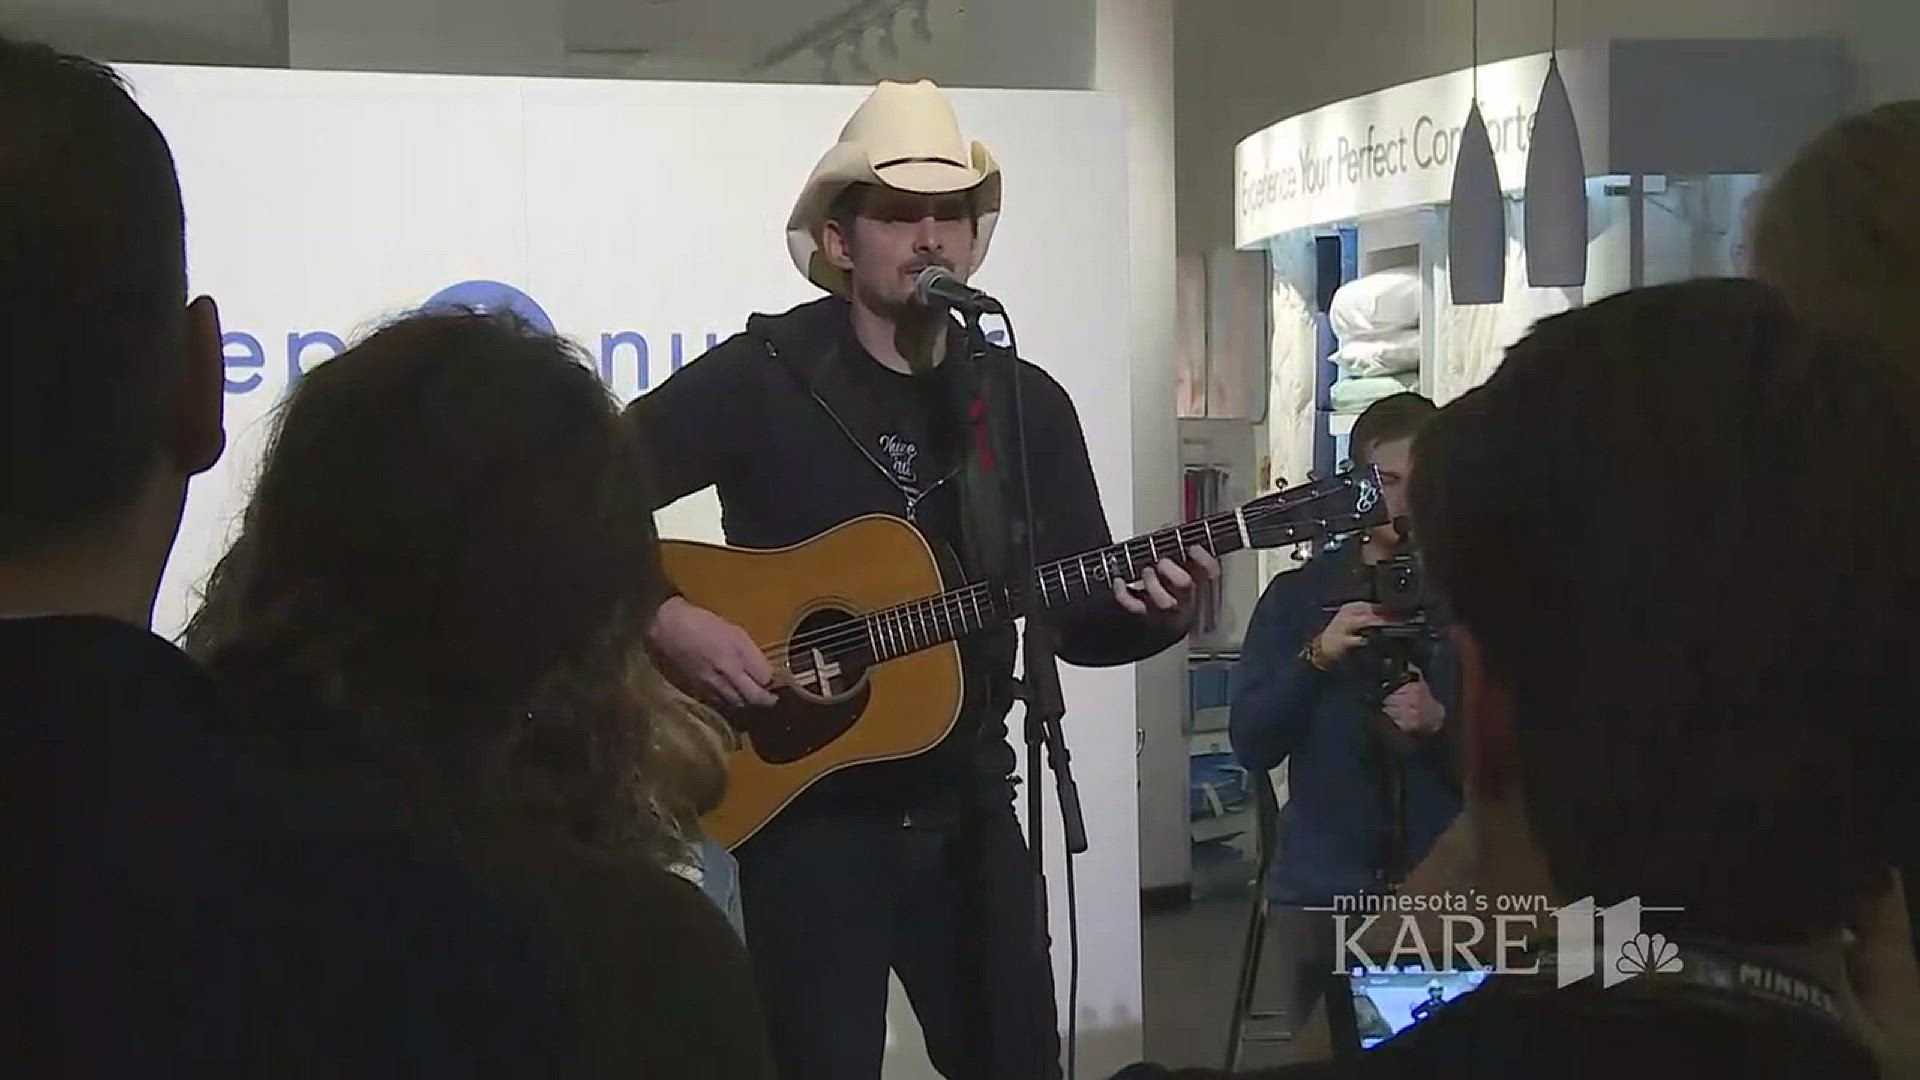 Brad Paisley surprised fans with a pop-up show at the Sleep Number store at the Mall of America on Tuesday. http://kare11.tv/2Ese7Ie